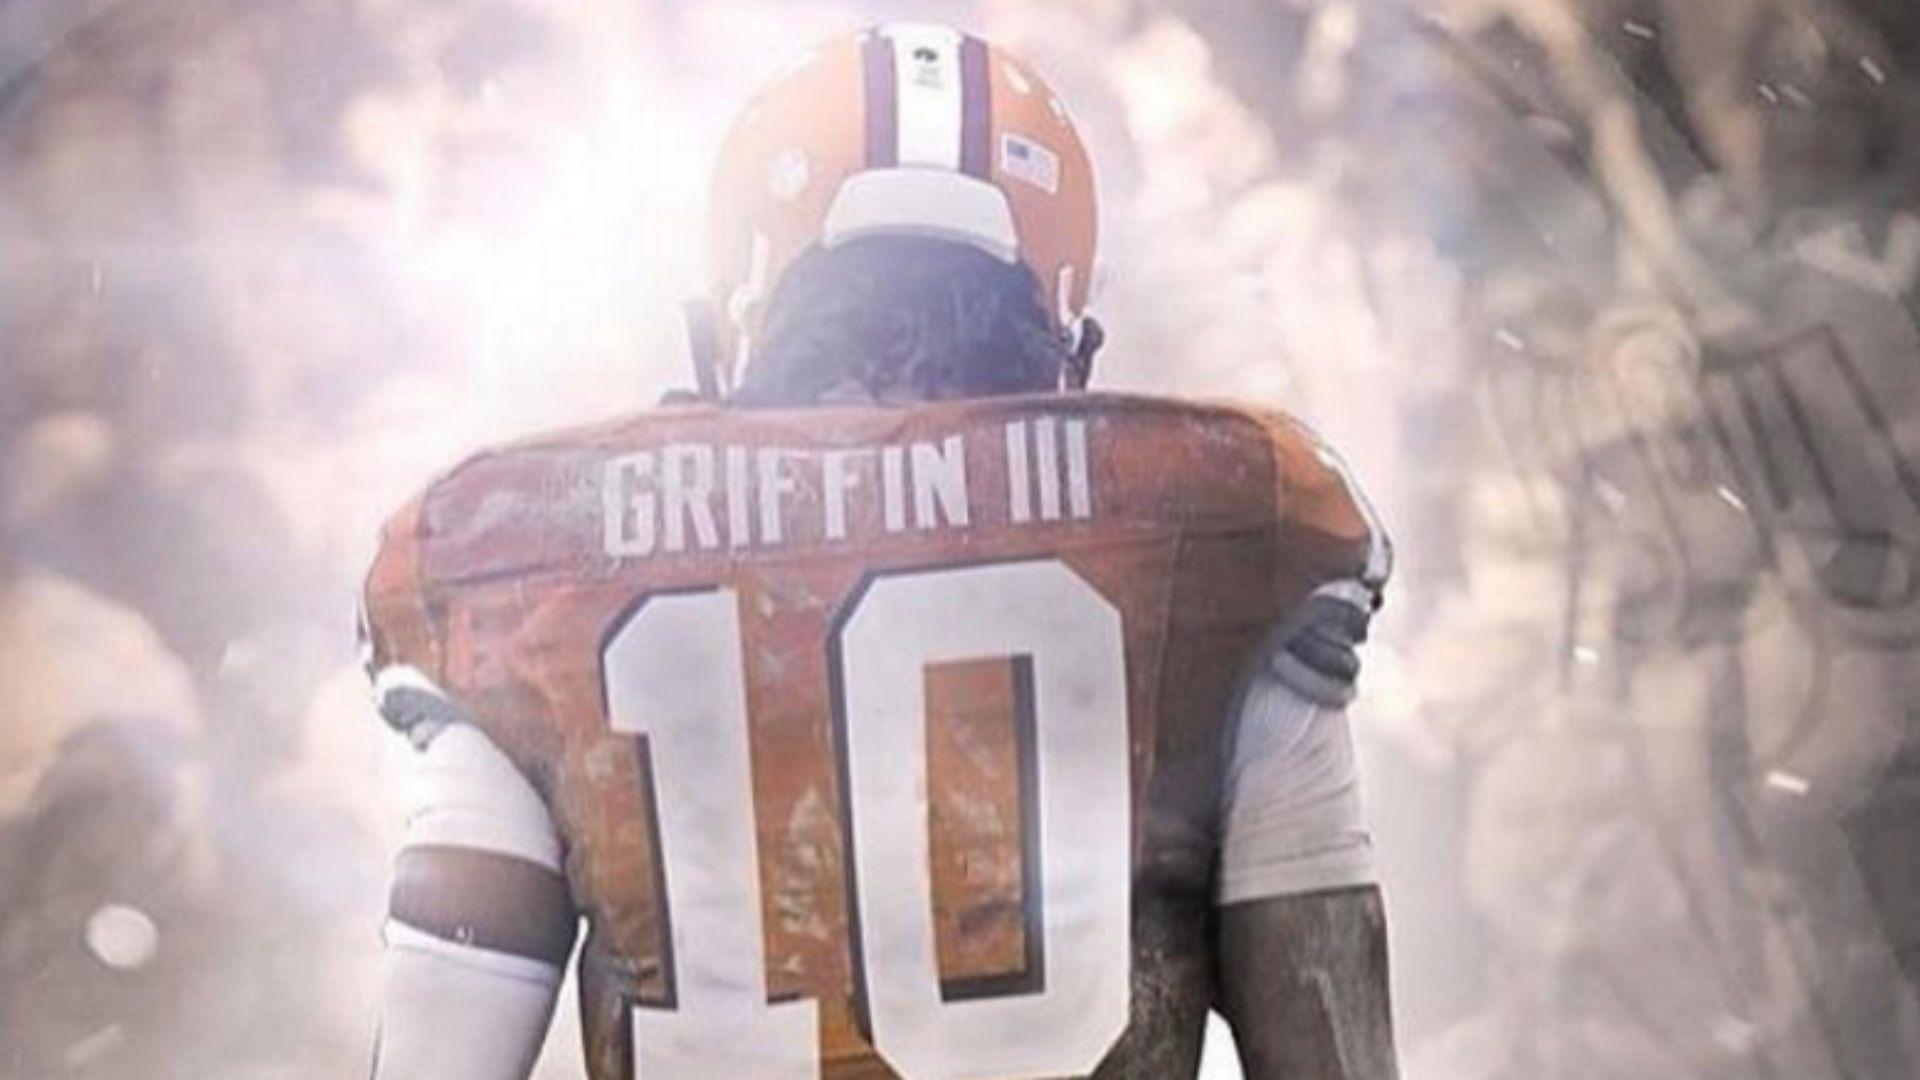 RGIII's Browns uniform will be on the shelves soon enough. NFL